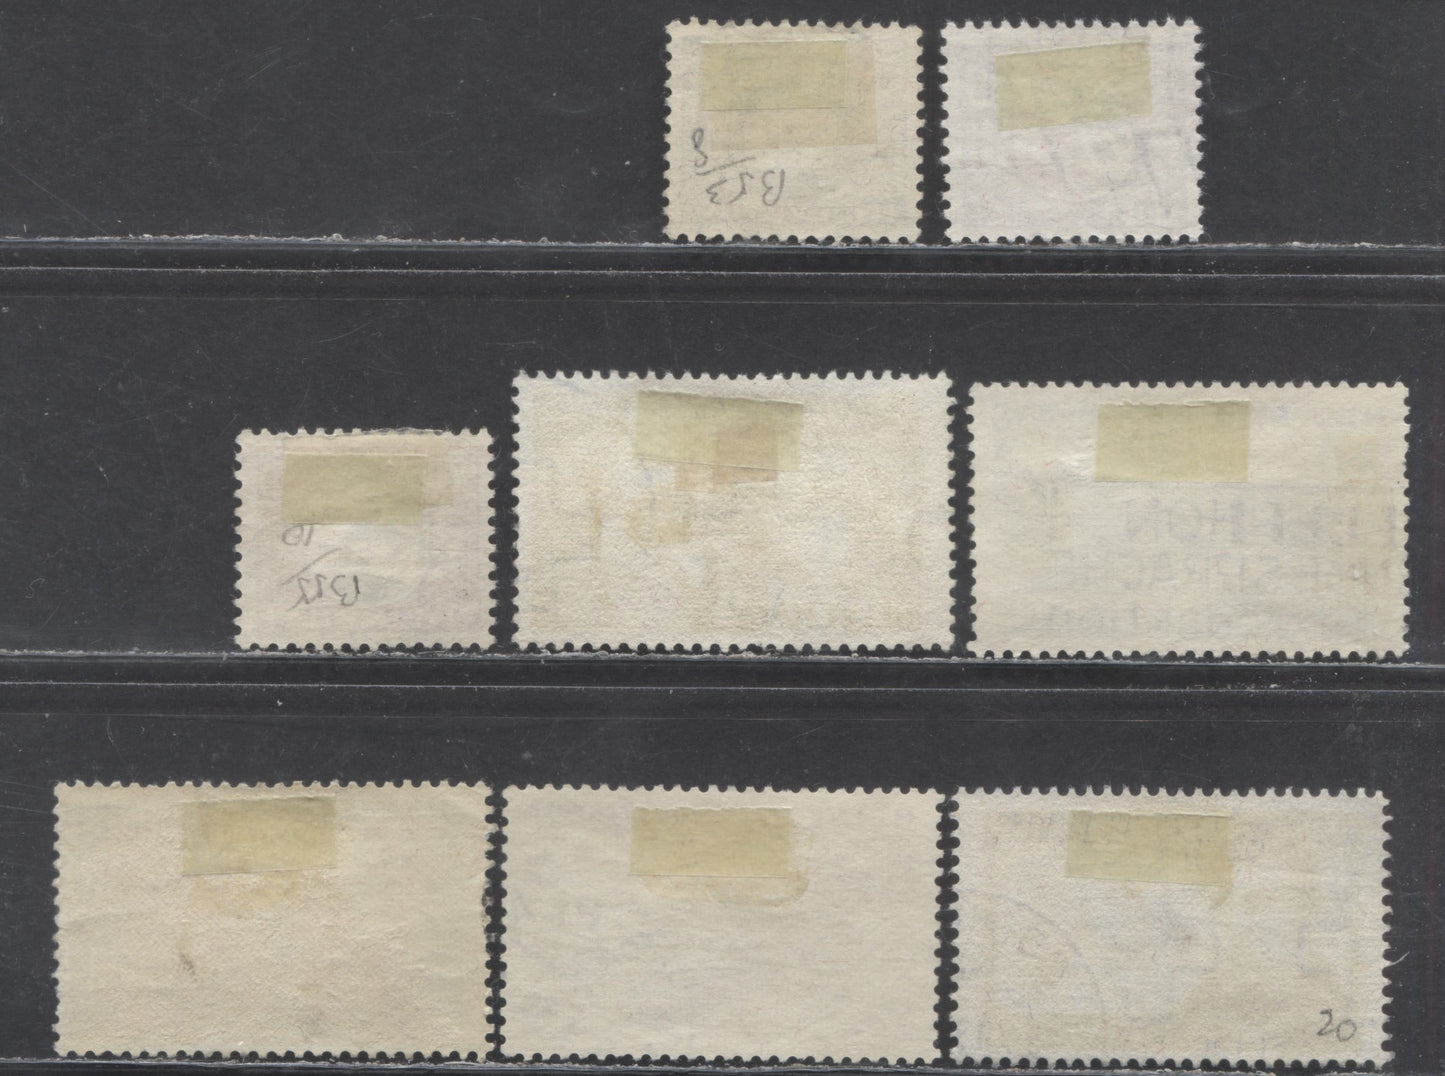 Lot 307 Switzerland SC#B53-B60 1930-1931 Semi Postals, 8 Fine/Very Fine Used Singles, Click on Listing to See ALL Pictures, 2022 Scott Classic Cat. $43.4 USD